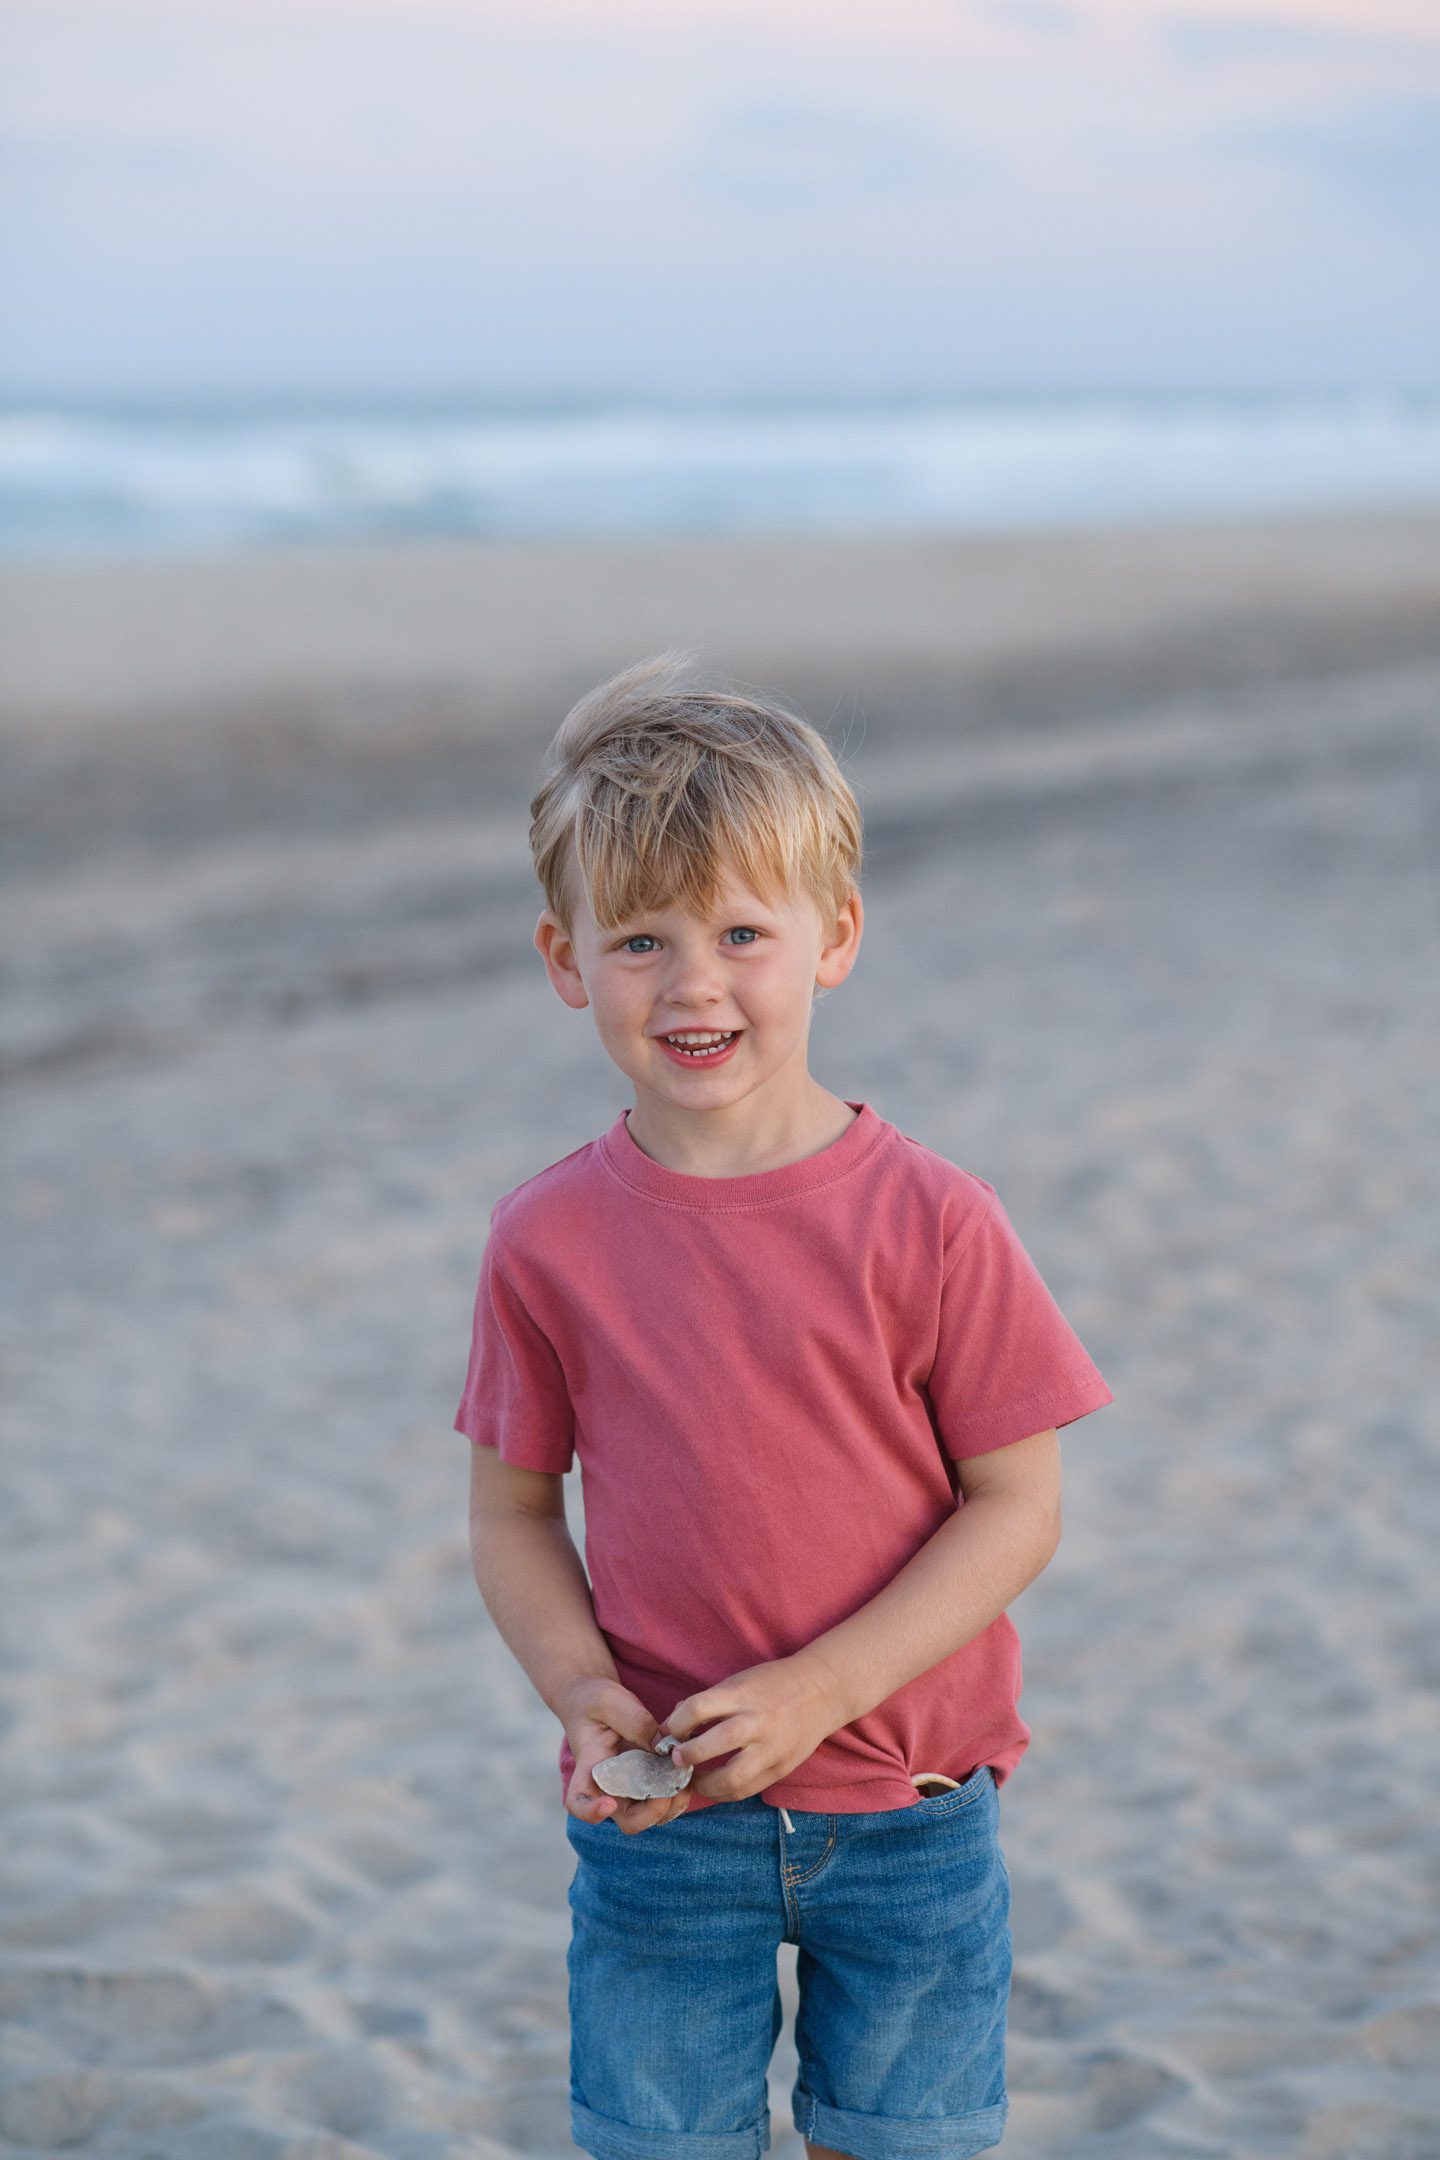 Collecting shells during an Avon portrait session